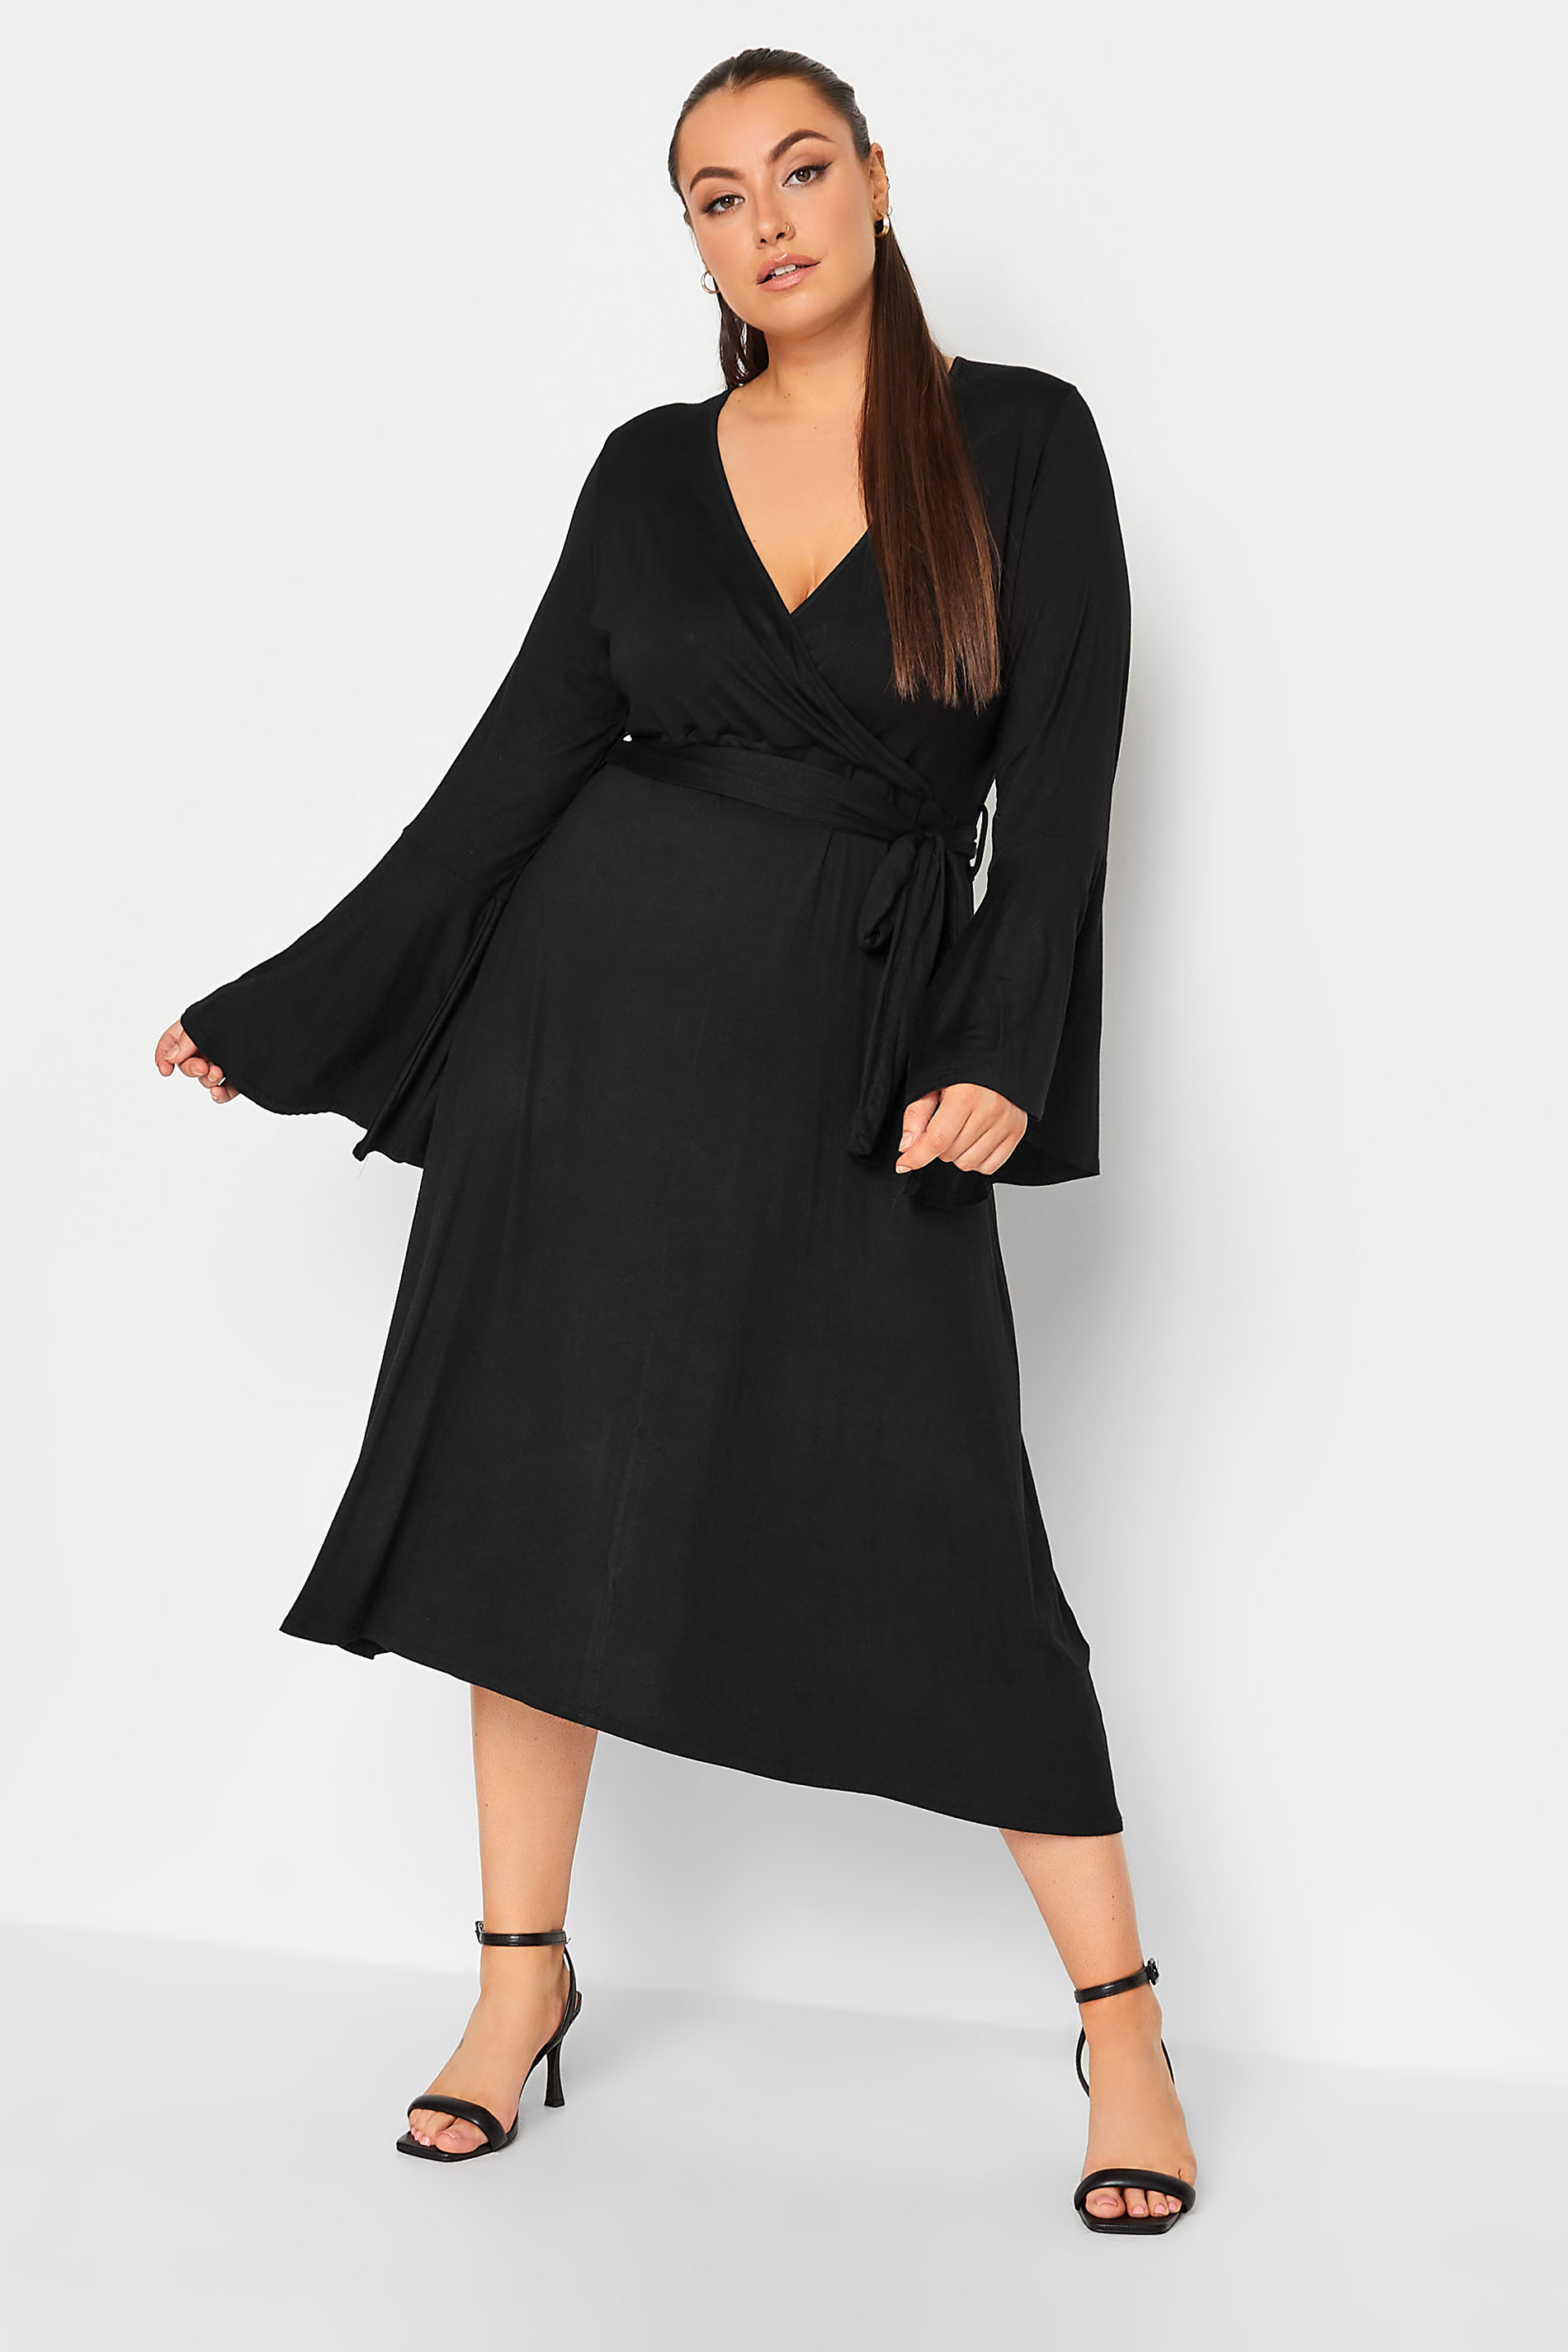 LIMITED COLLECTION Plus Size Black Flare Sleeve Wrap Dress | Yours Clothing 1